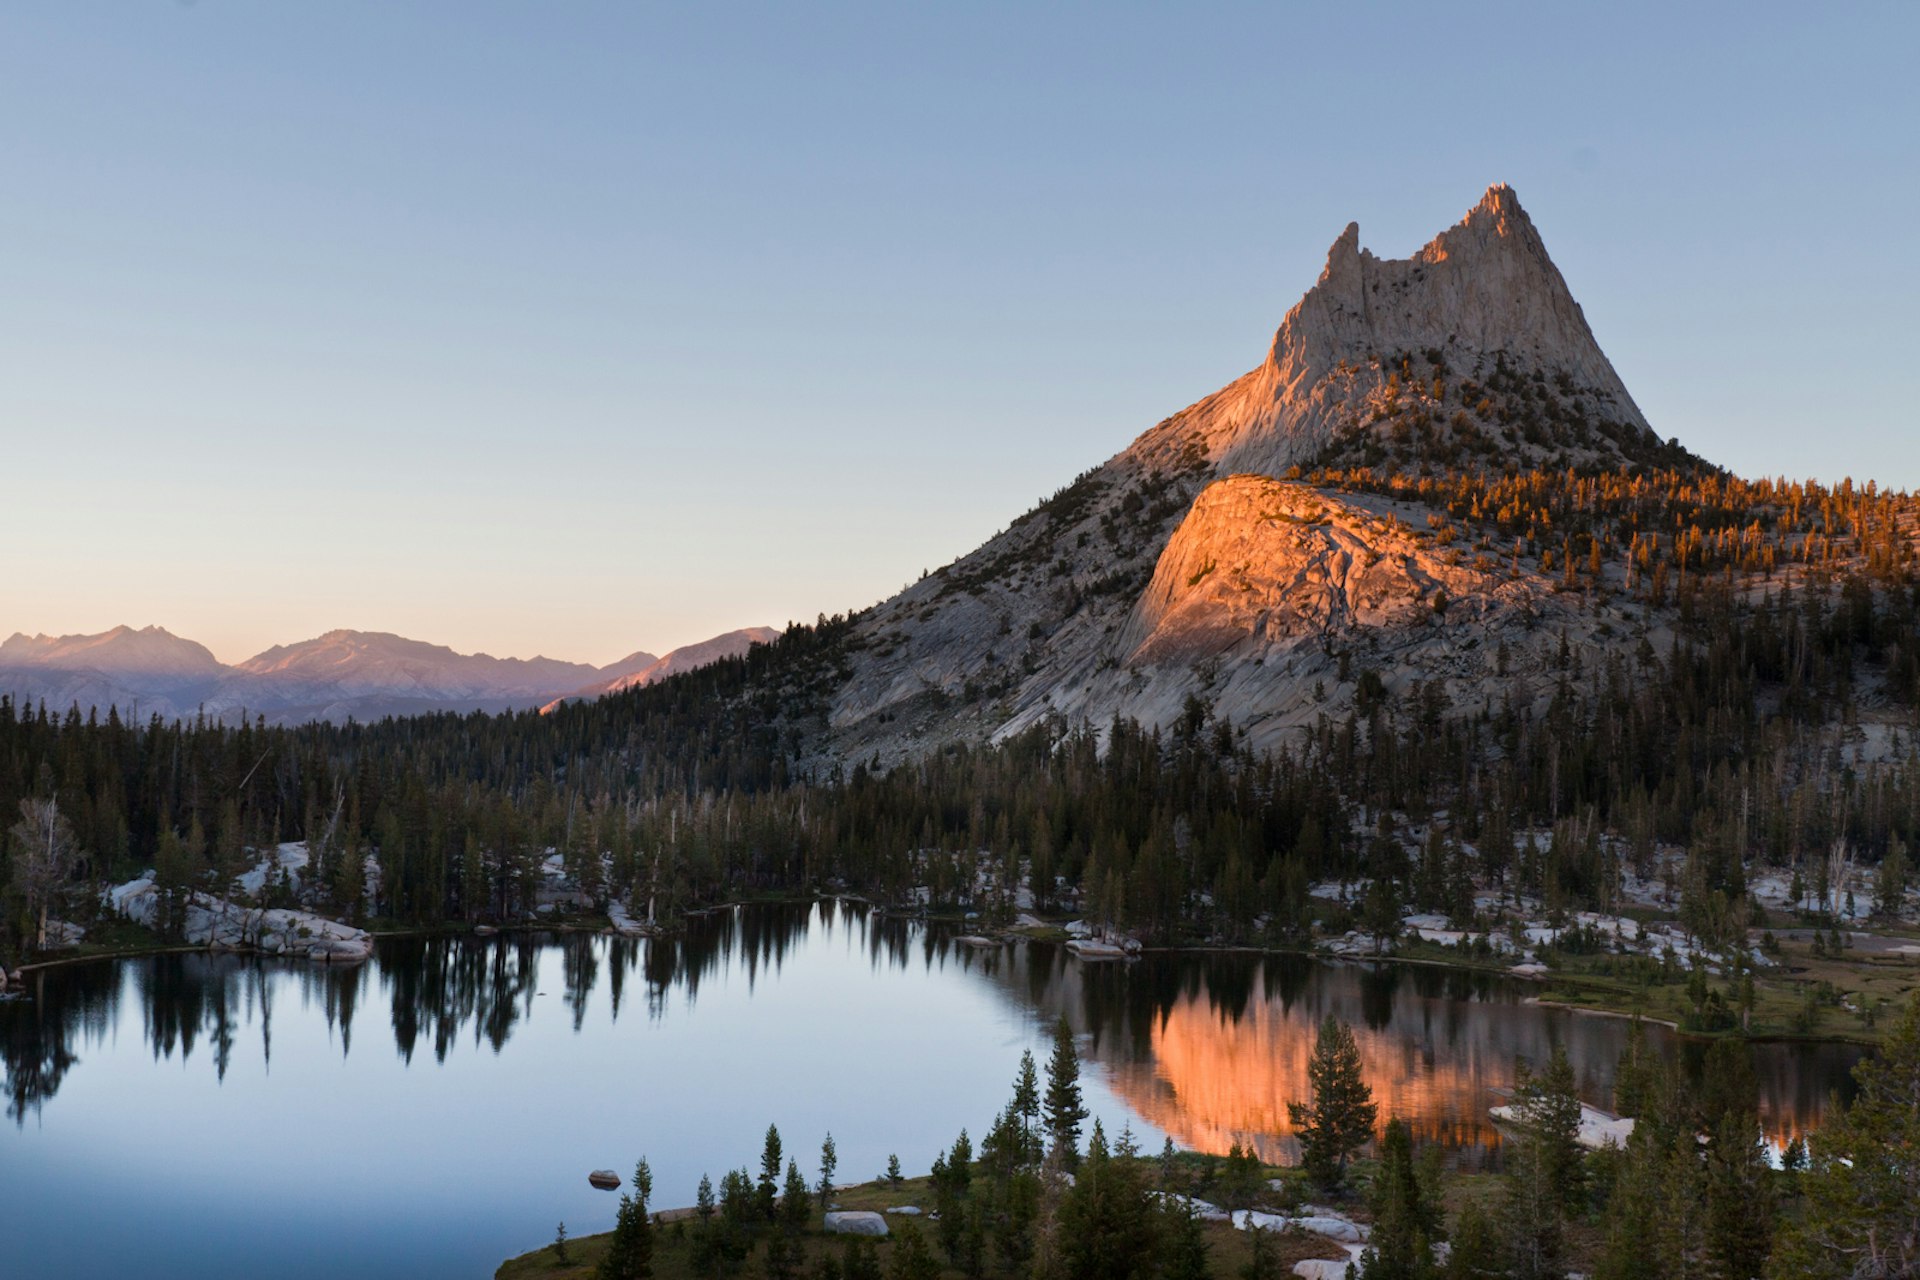 Sunset over Cathedral Peak and Upper Cathedral Lake. Image by Brandon Levinger / CC BY 2.0